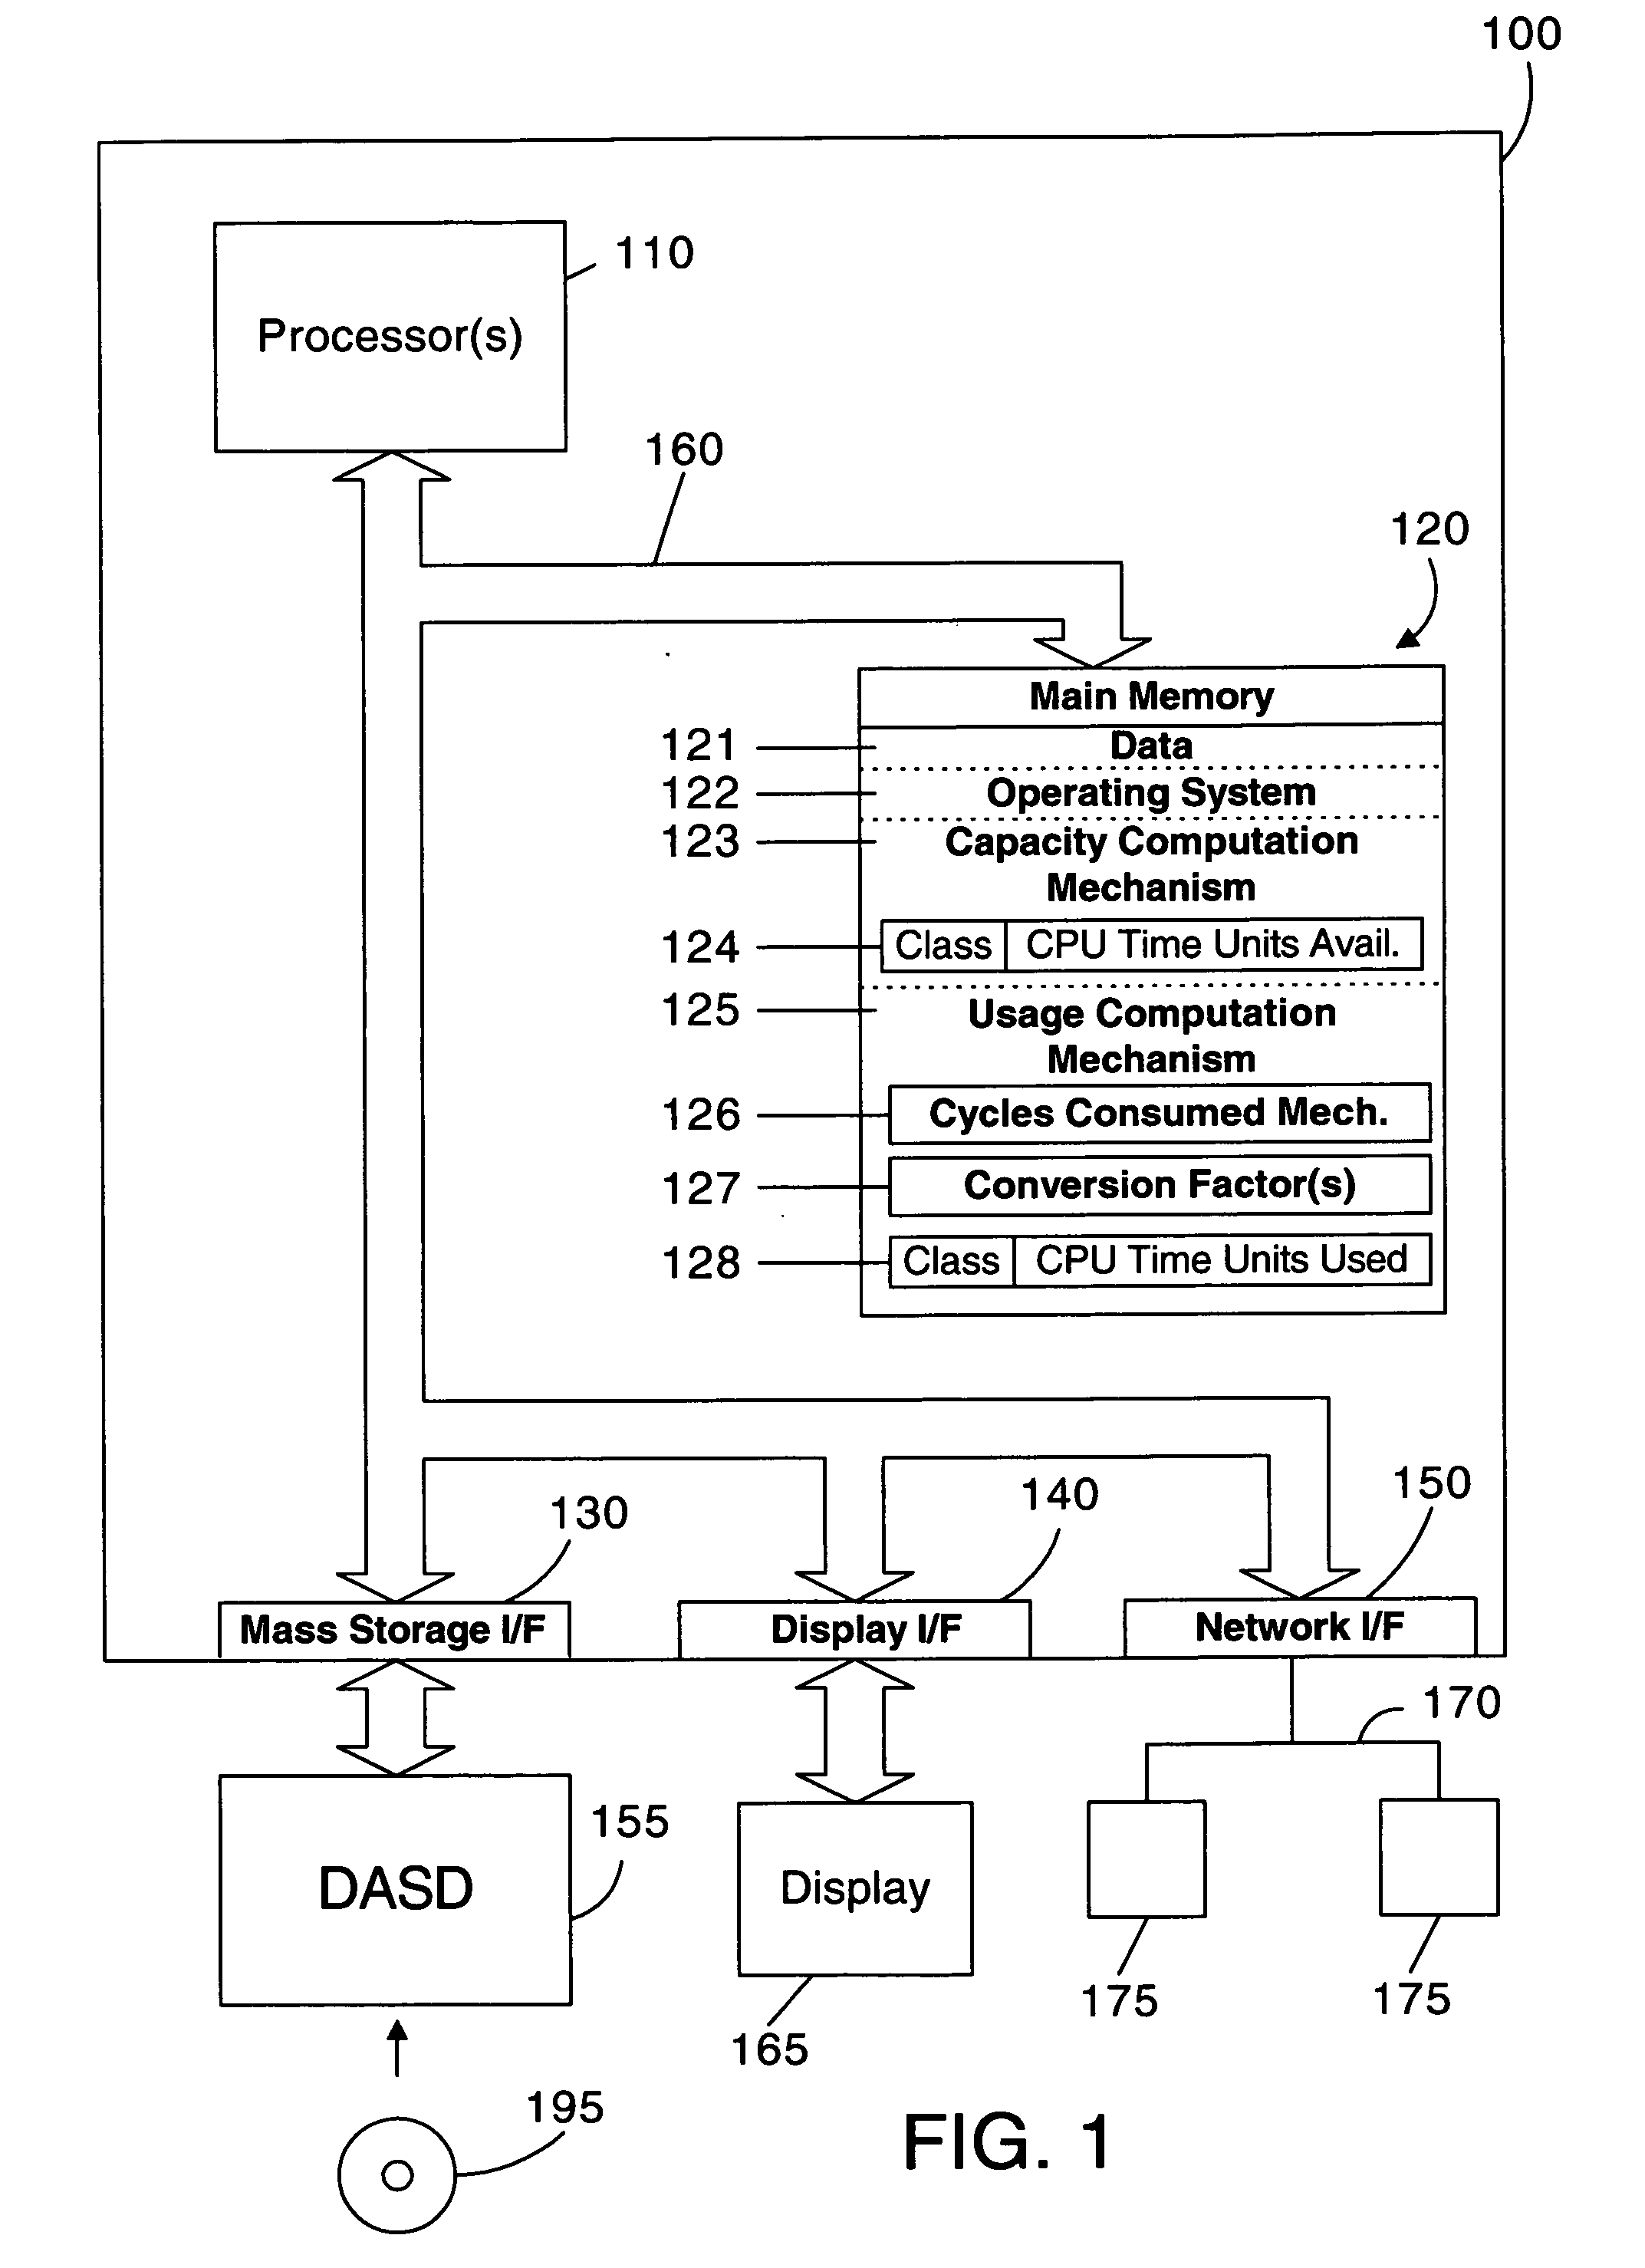 Apparatus and method for measuring and reporting processor capacity and processor usage in a computer system with processors of different speed and/or architecture